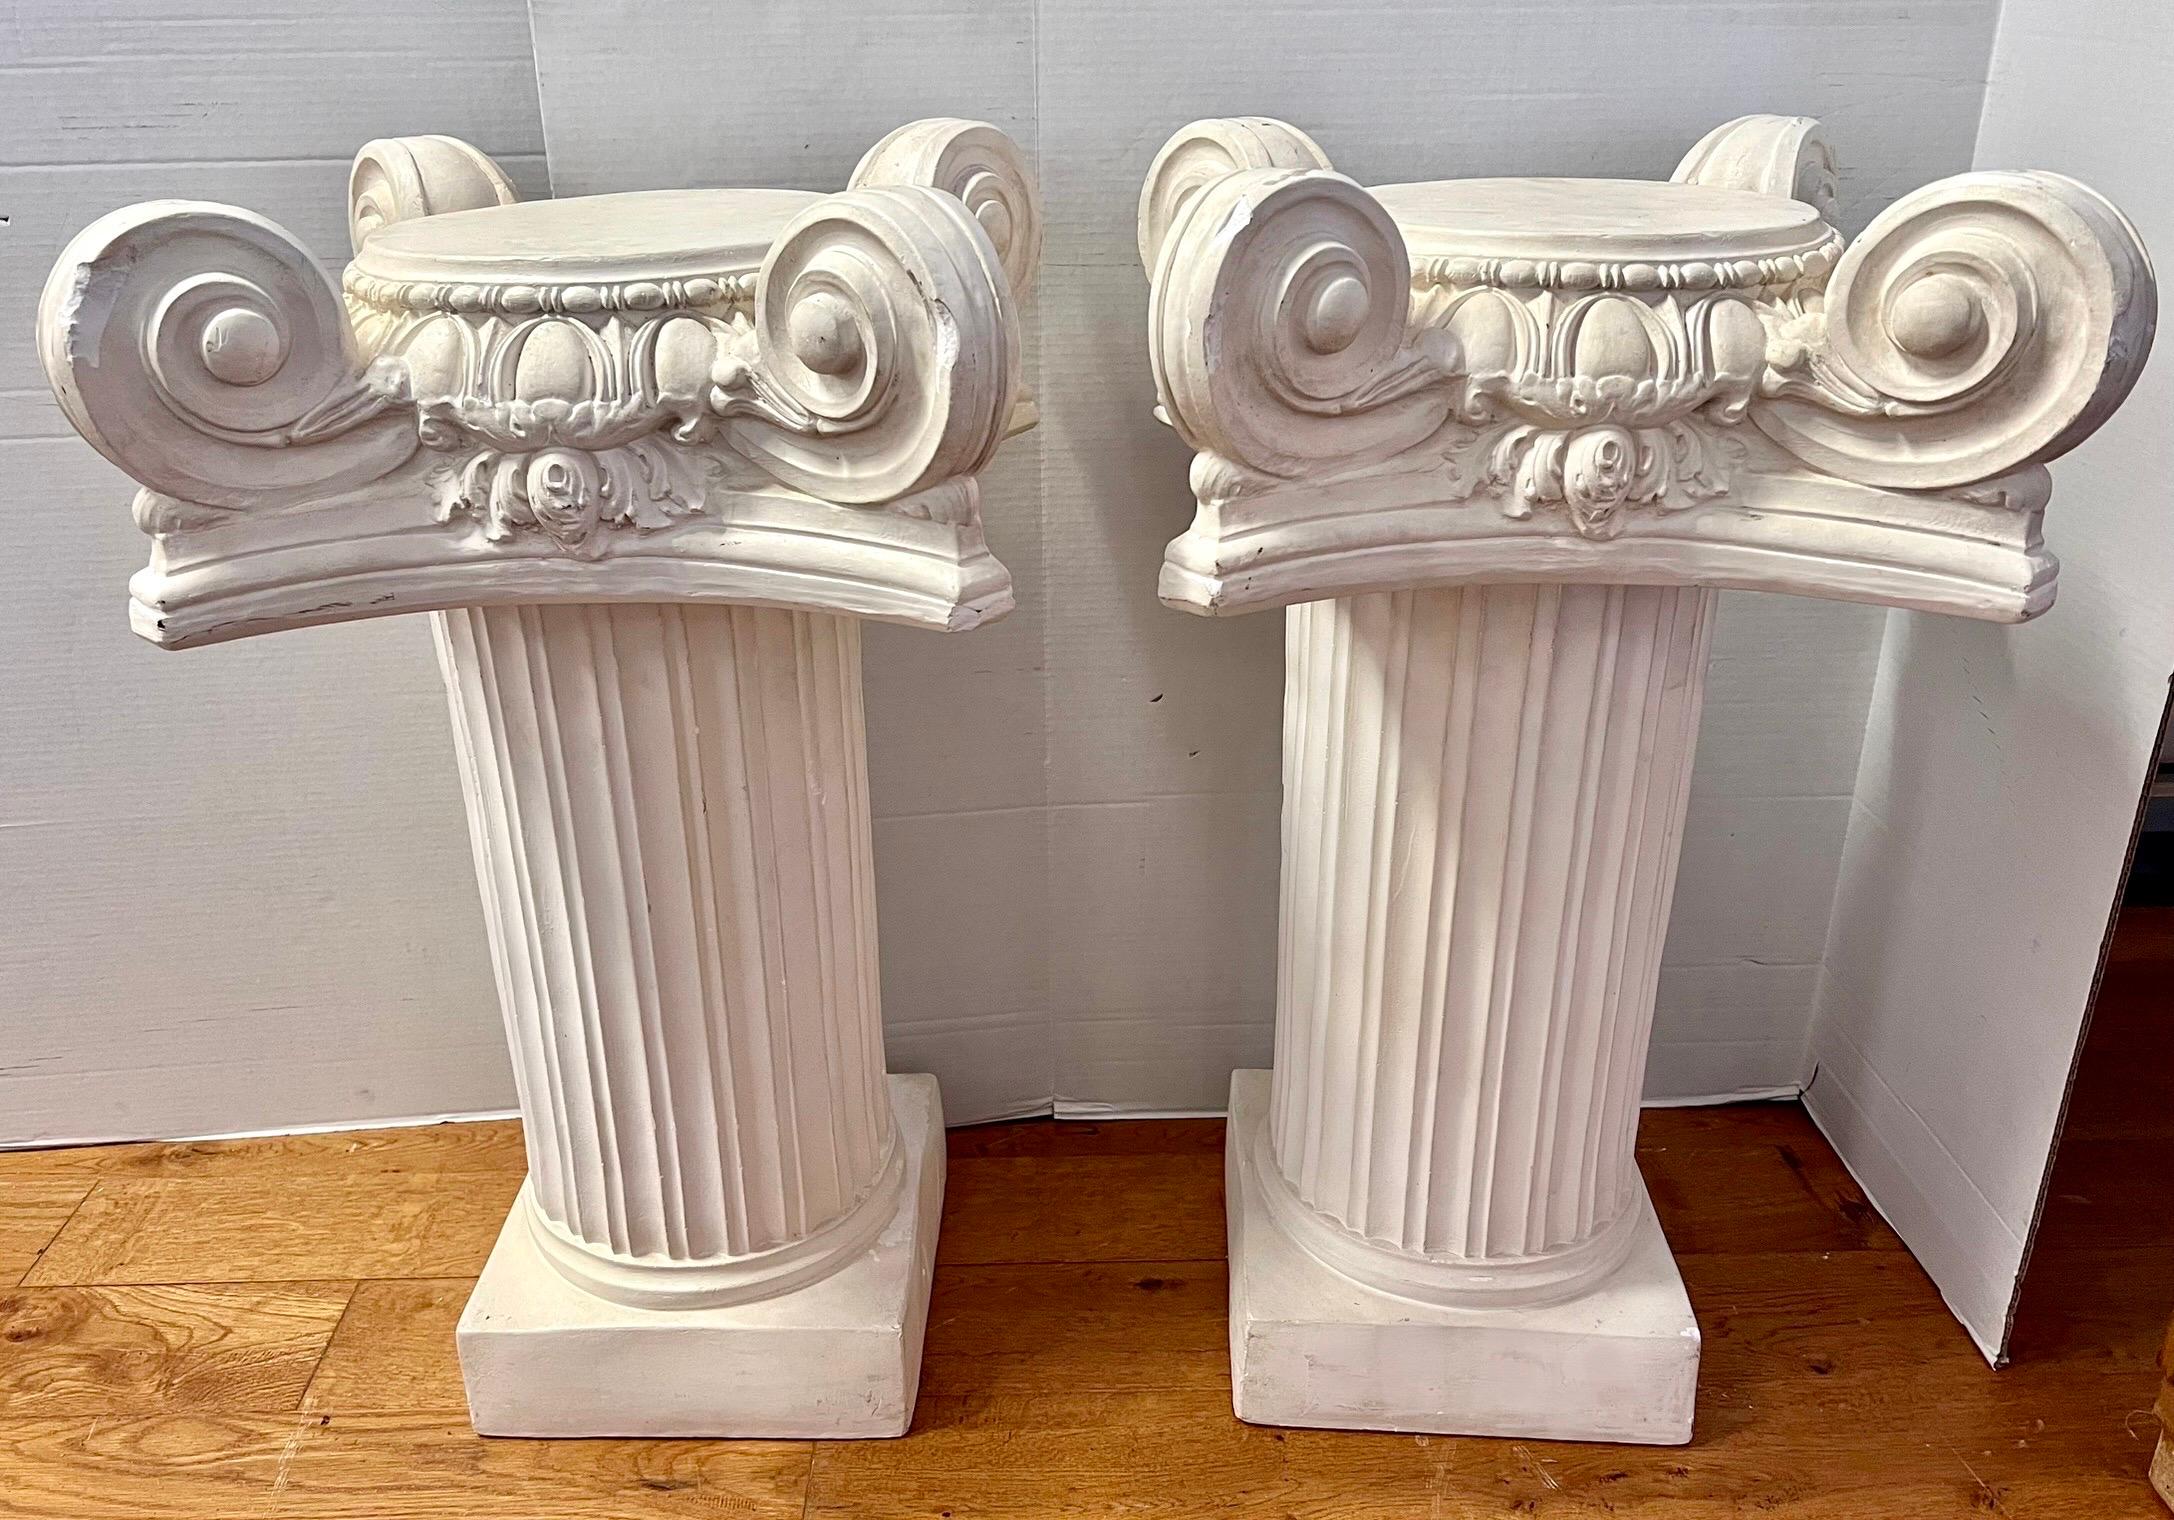 Pair of large heavy plaster iconic columns or side tables  multi-purpose.  Each has two pieces with top portion of column coming off for ease of movement.